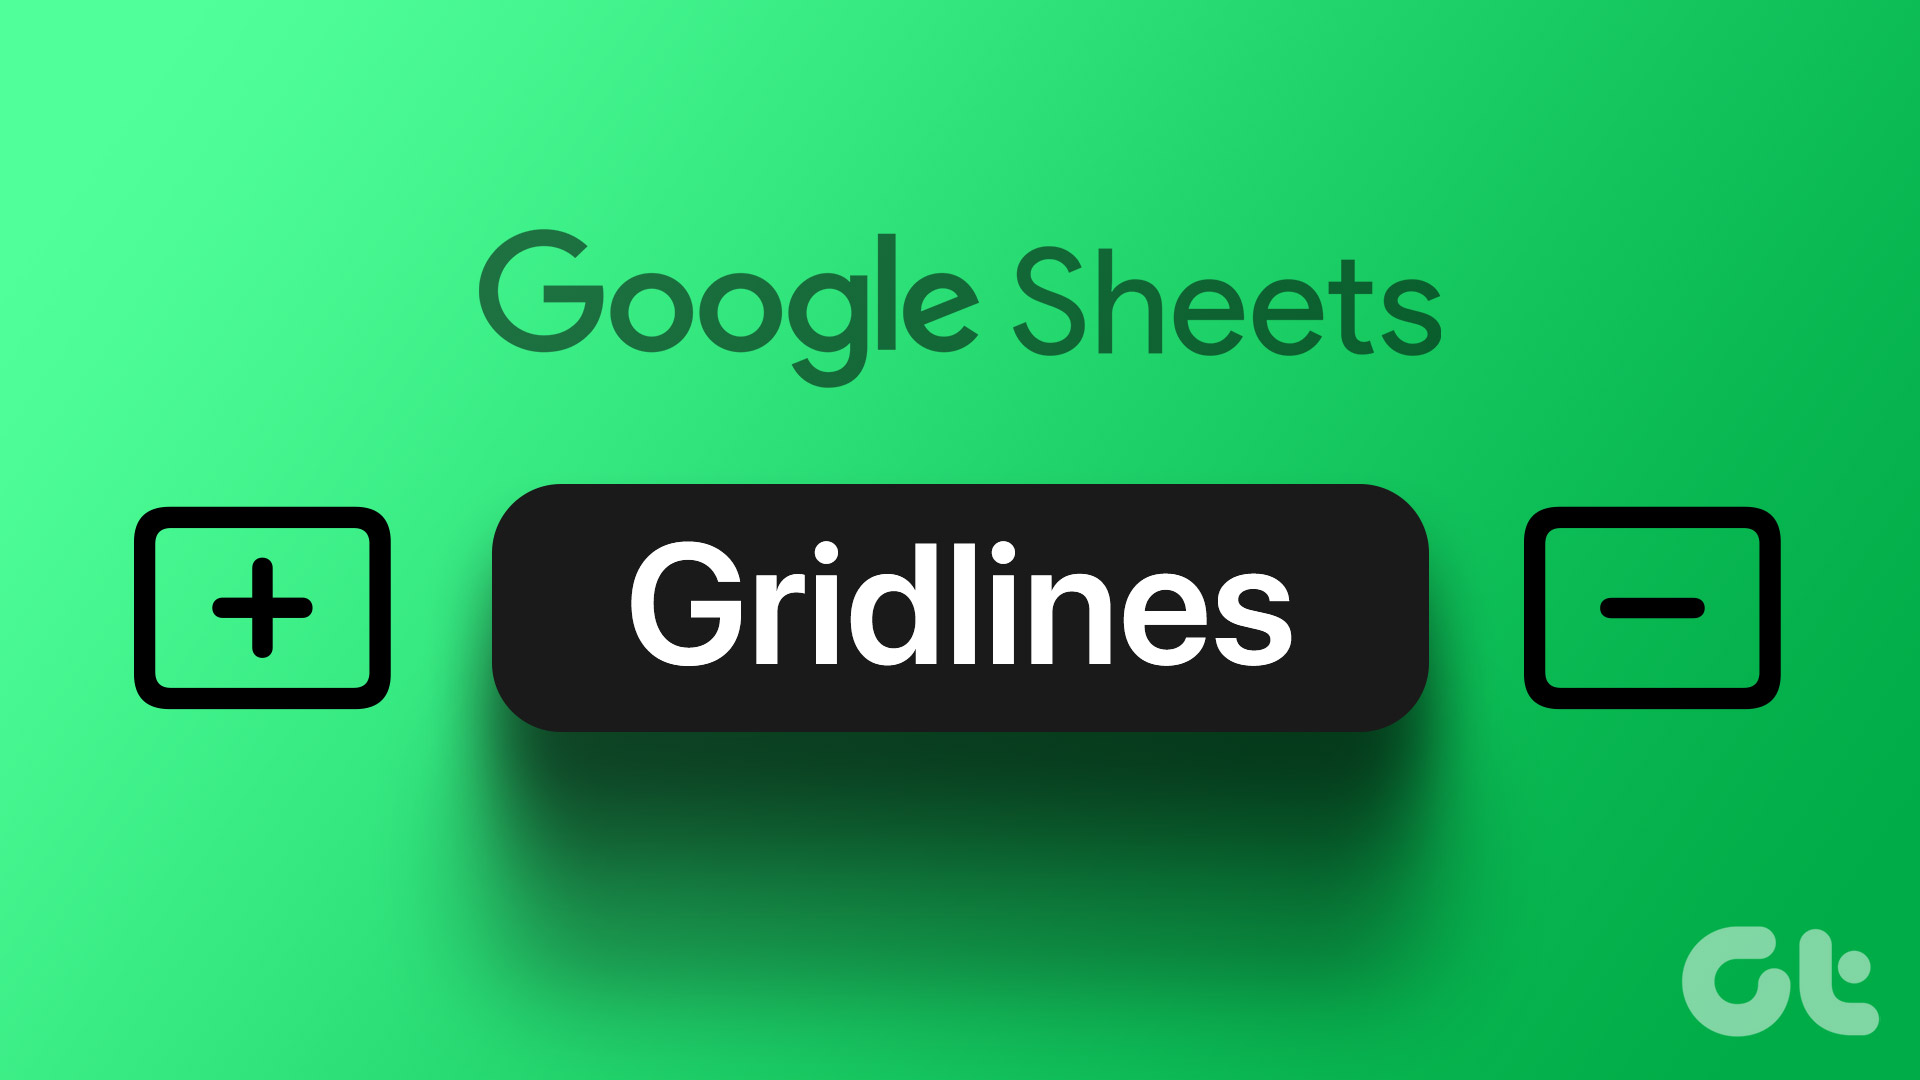 How to Add or Remove Gridlines in Google Sheets